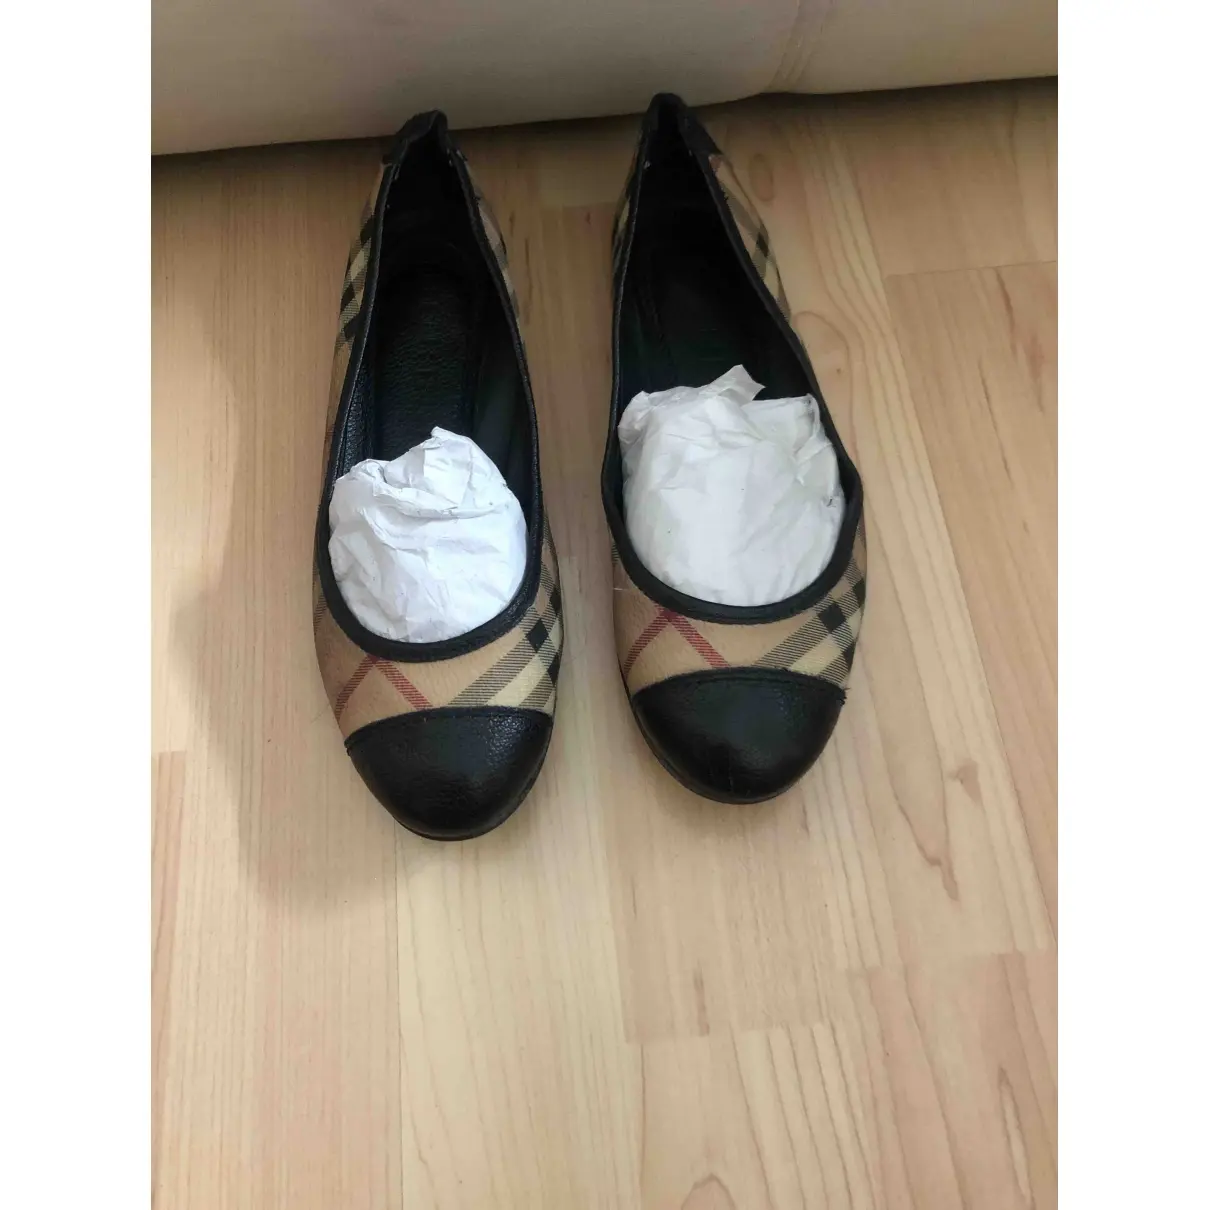 Burberry Patent leather ballet flats for sale